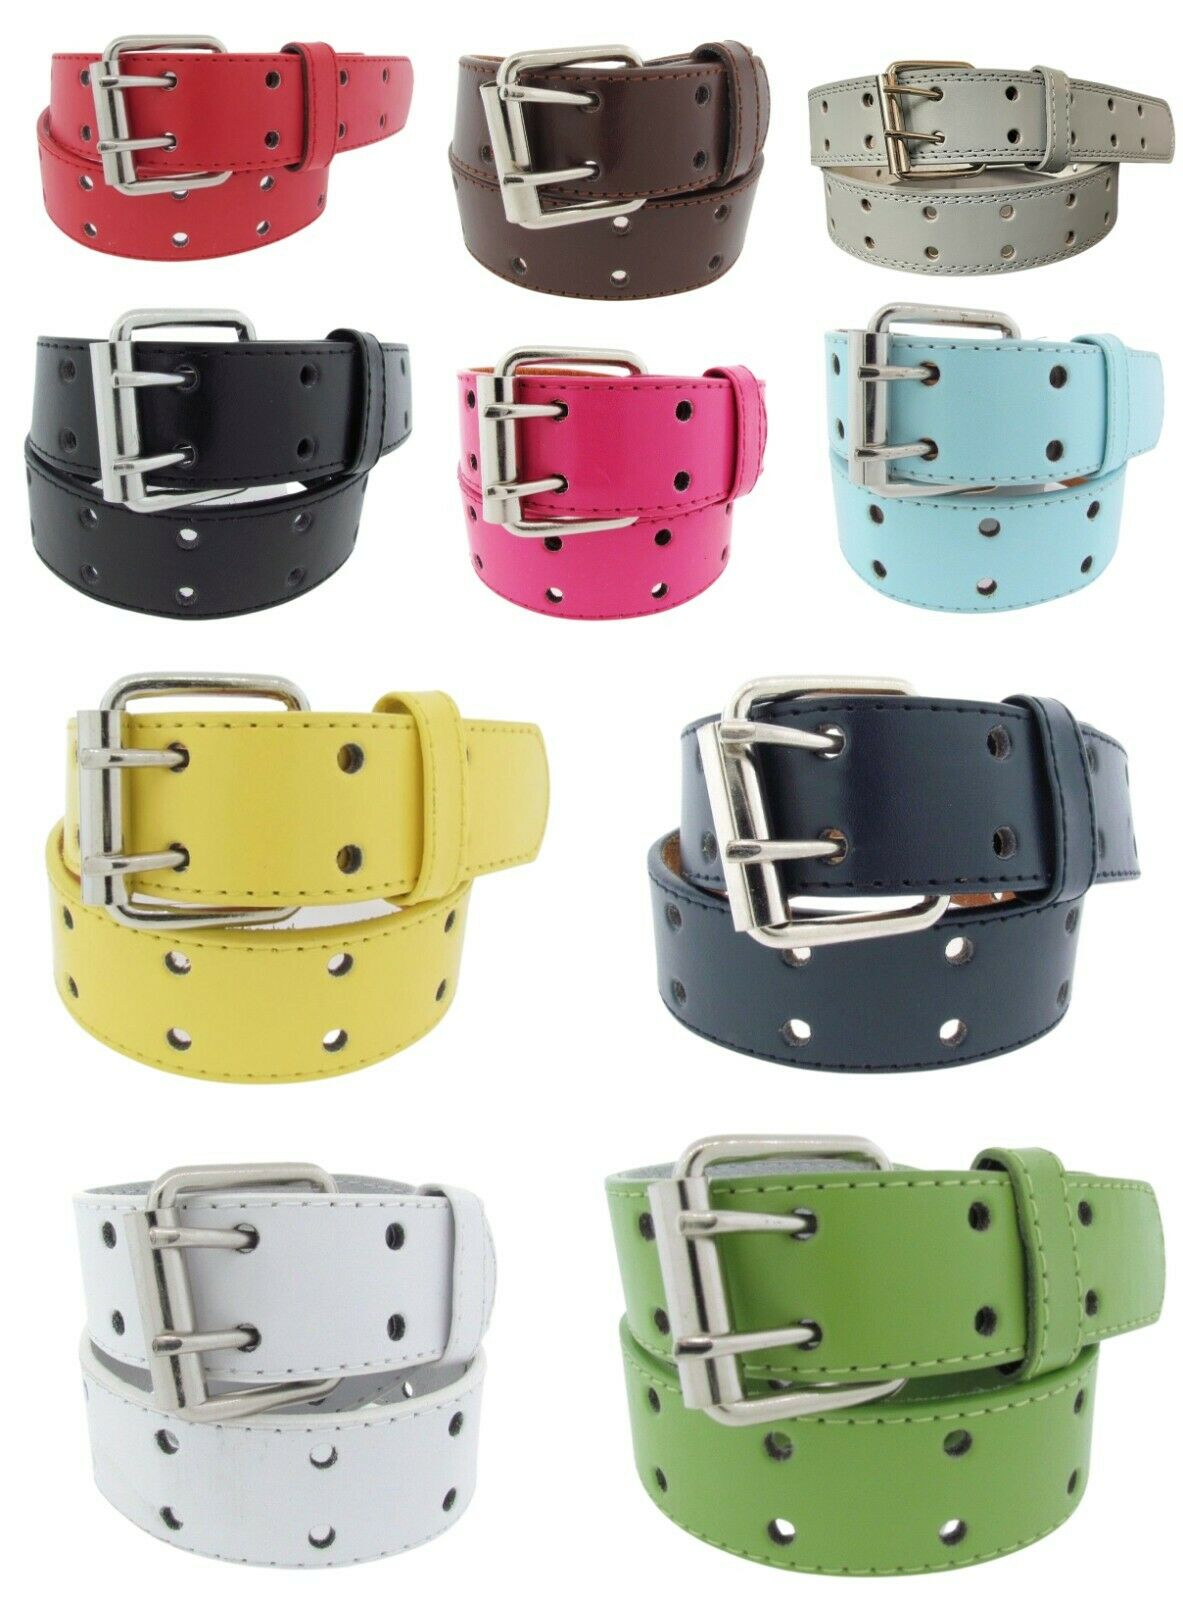 Genuine Leather Belt Unisex Double Row Closure Colorful Styles Silver Buckle 1.5